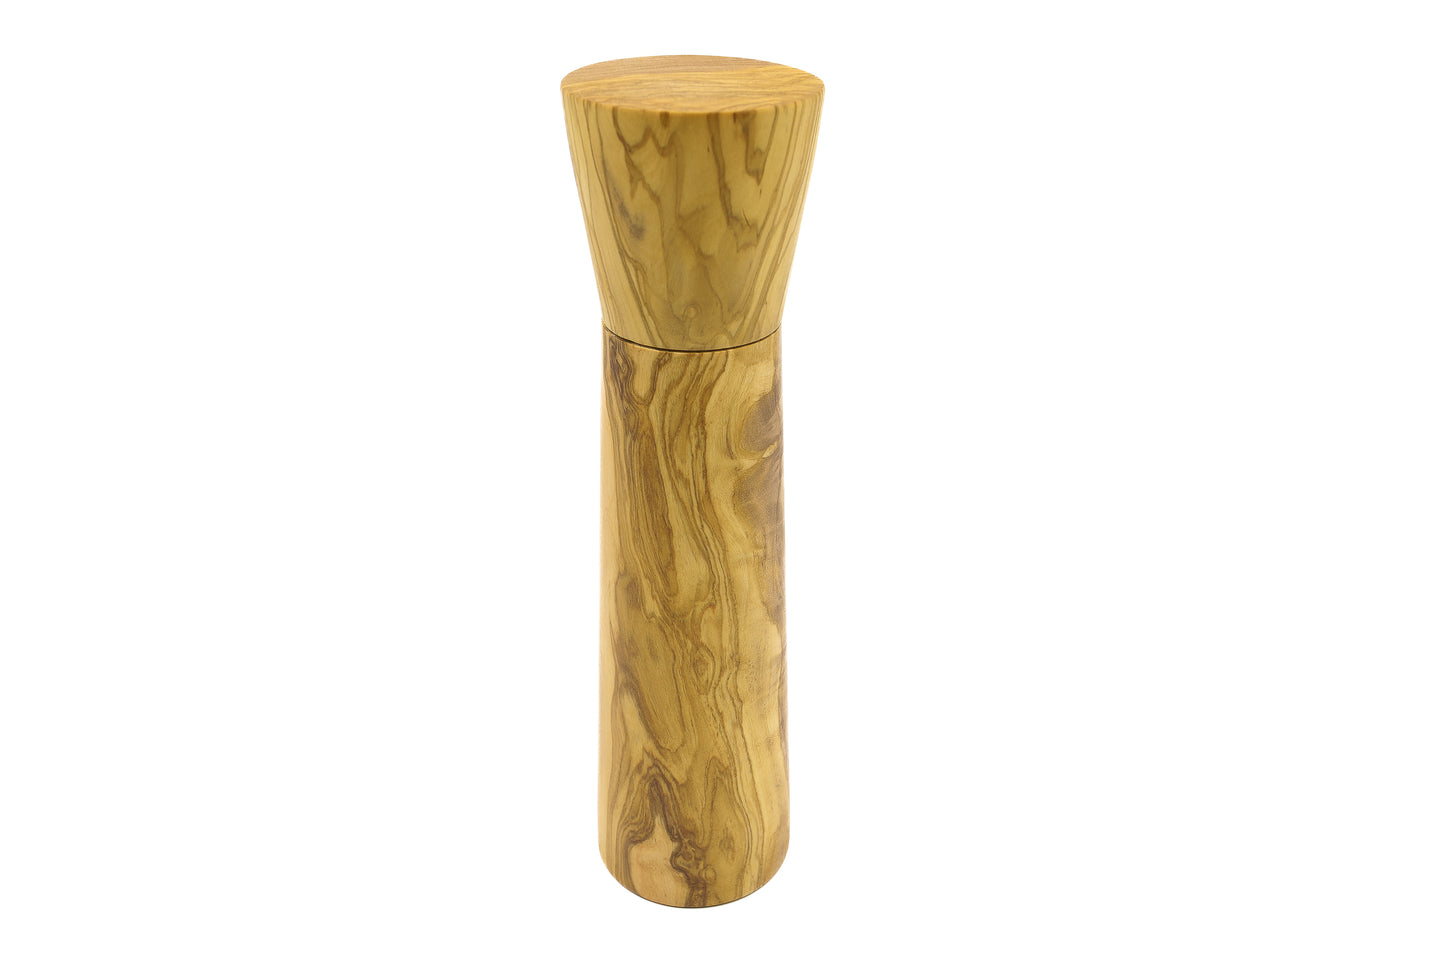 Handcrafted olive wood salt and pepper mills with ceramic grinding mechanism